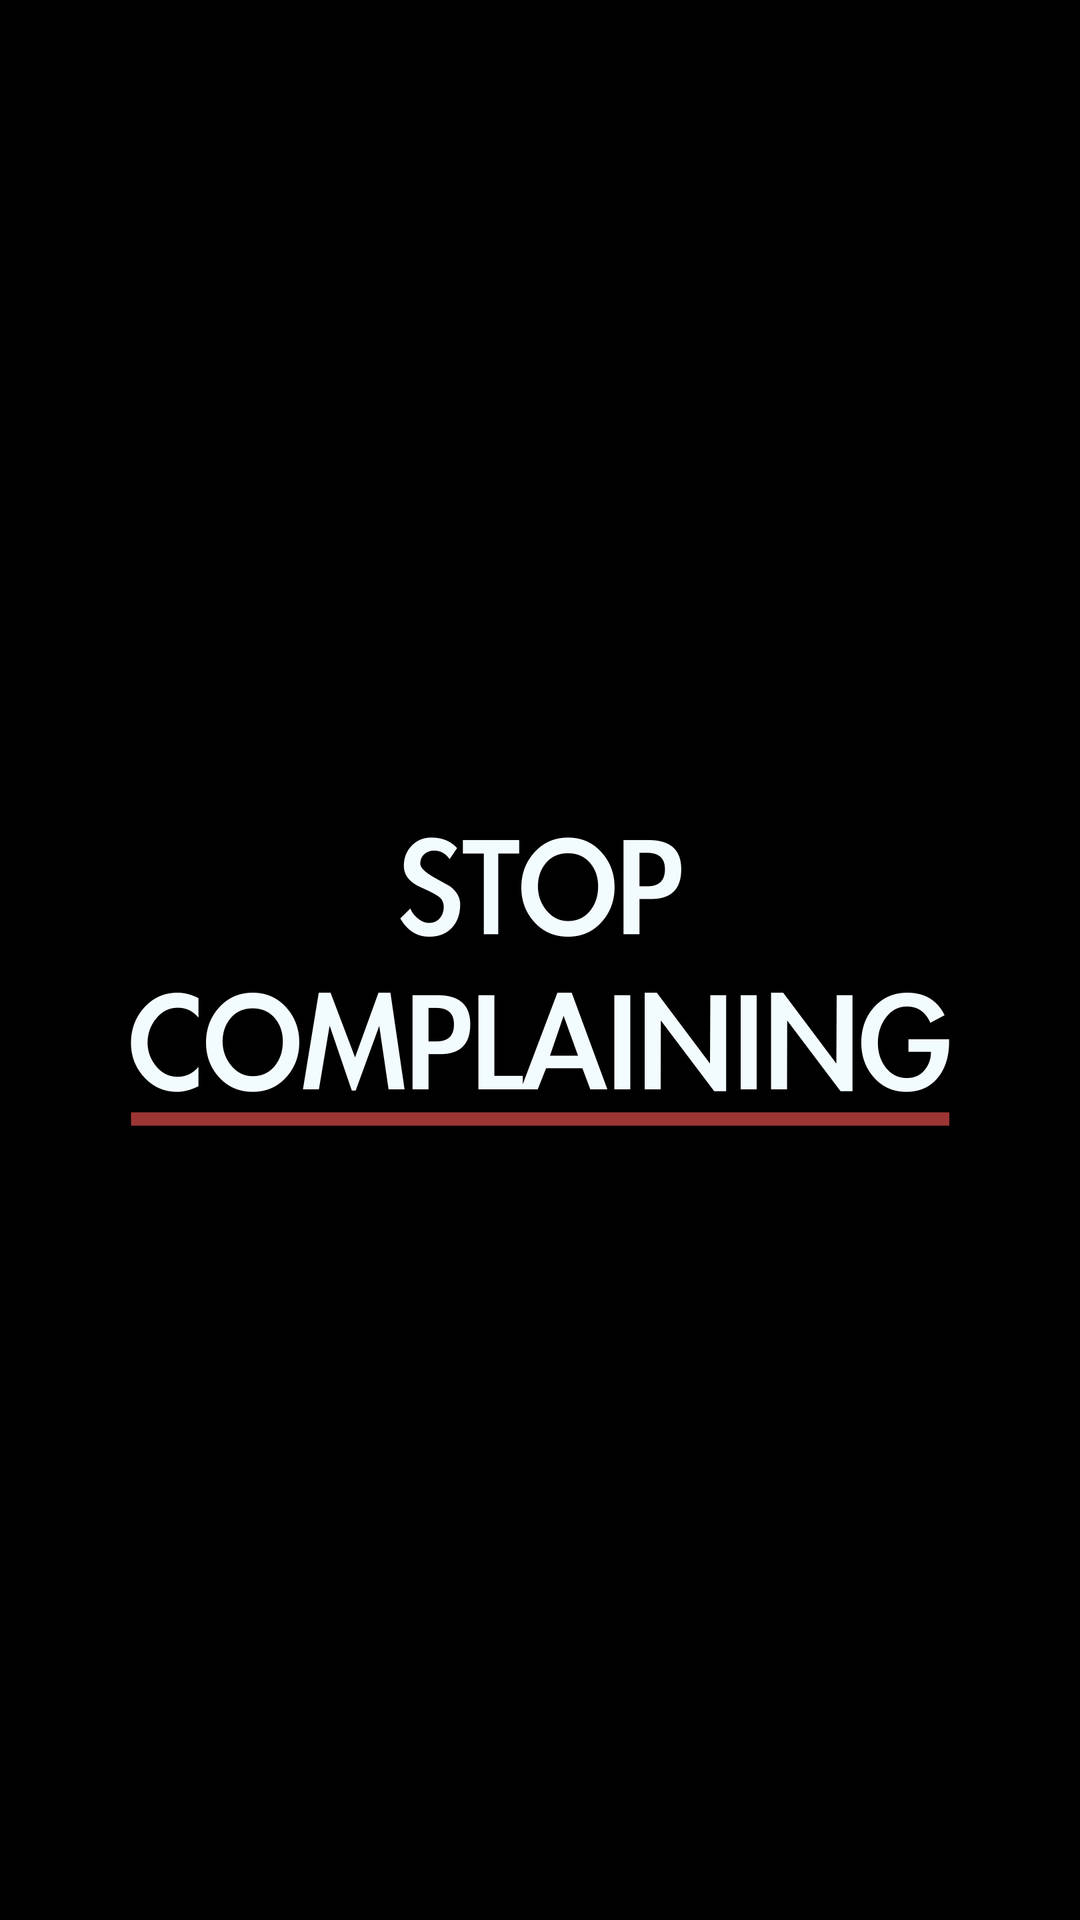 Stop Complaining Inspirational Quote Background